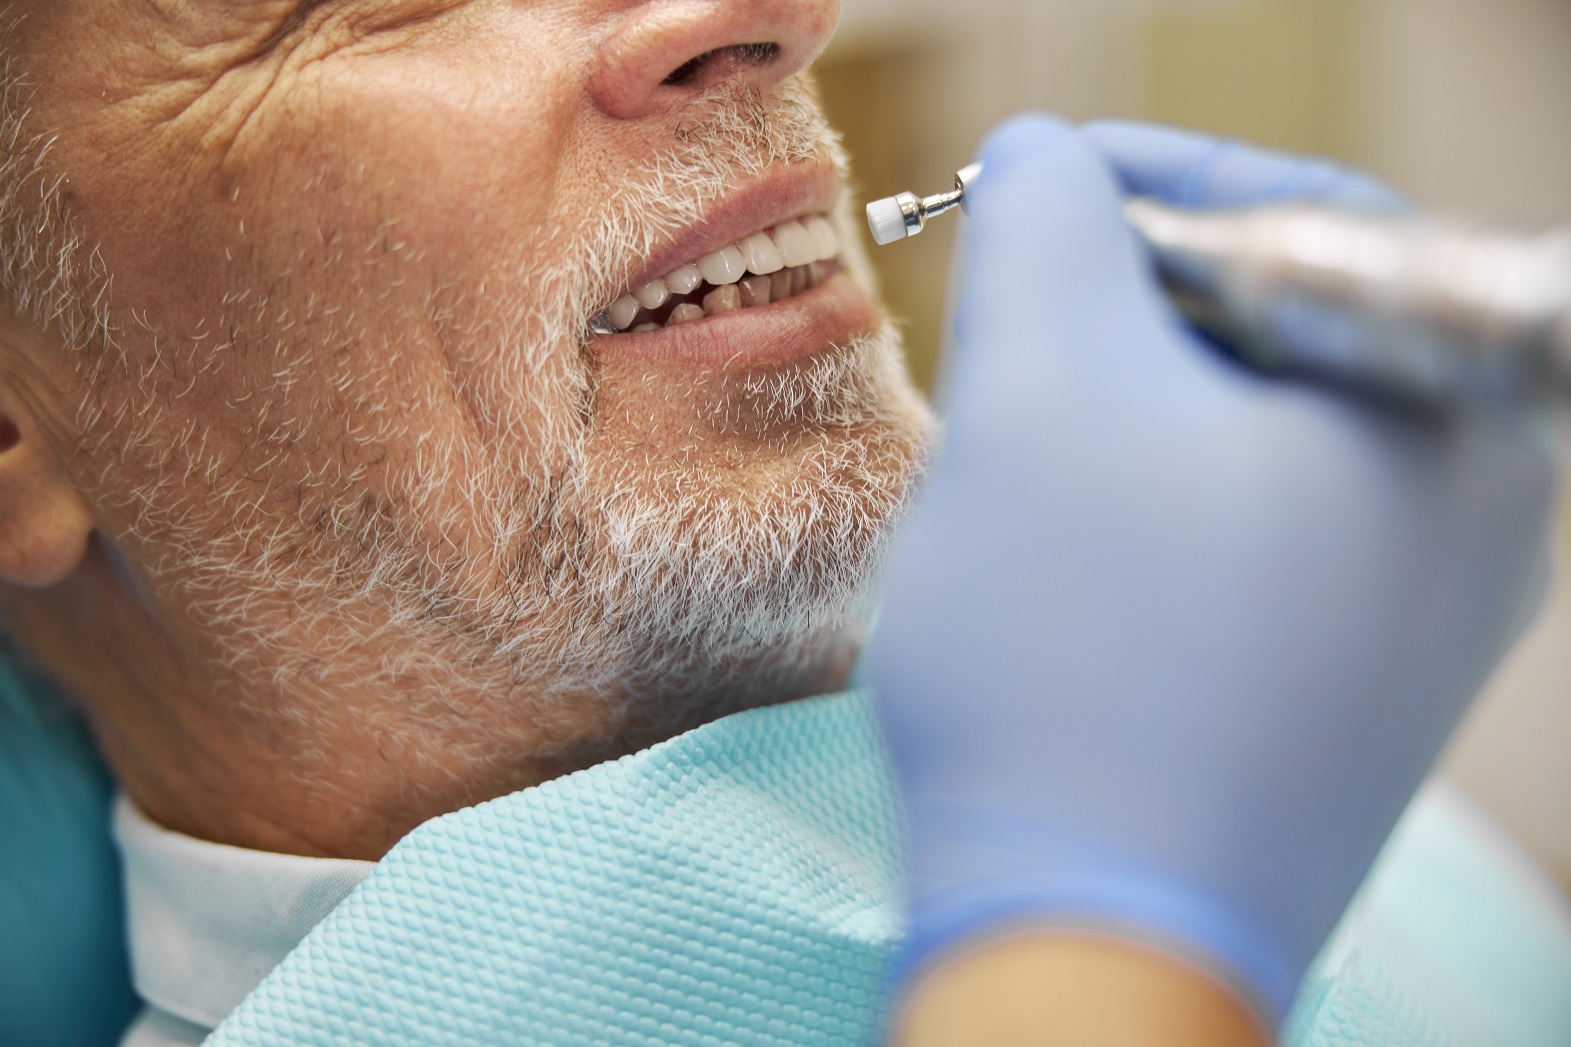 Dental burnisher in use during a dental appointment